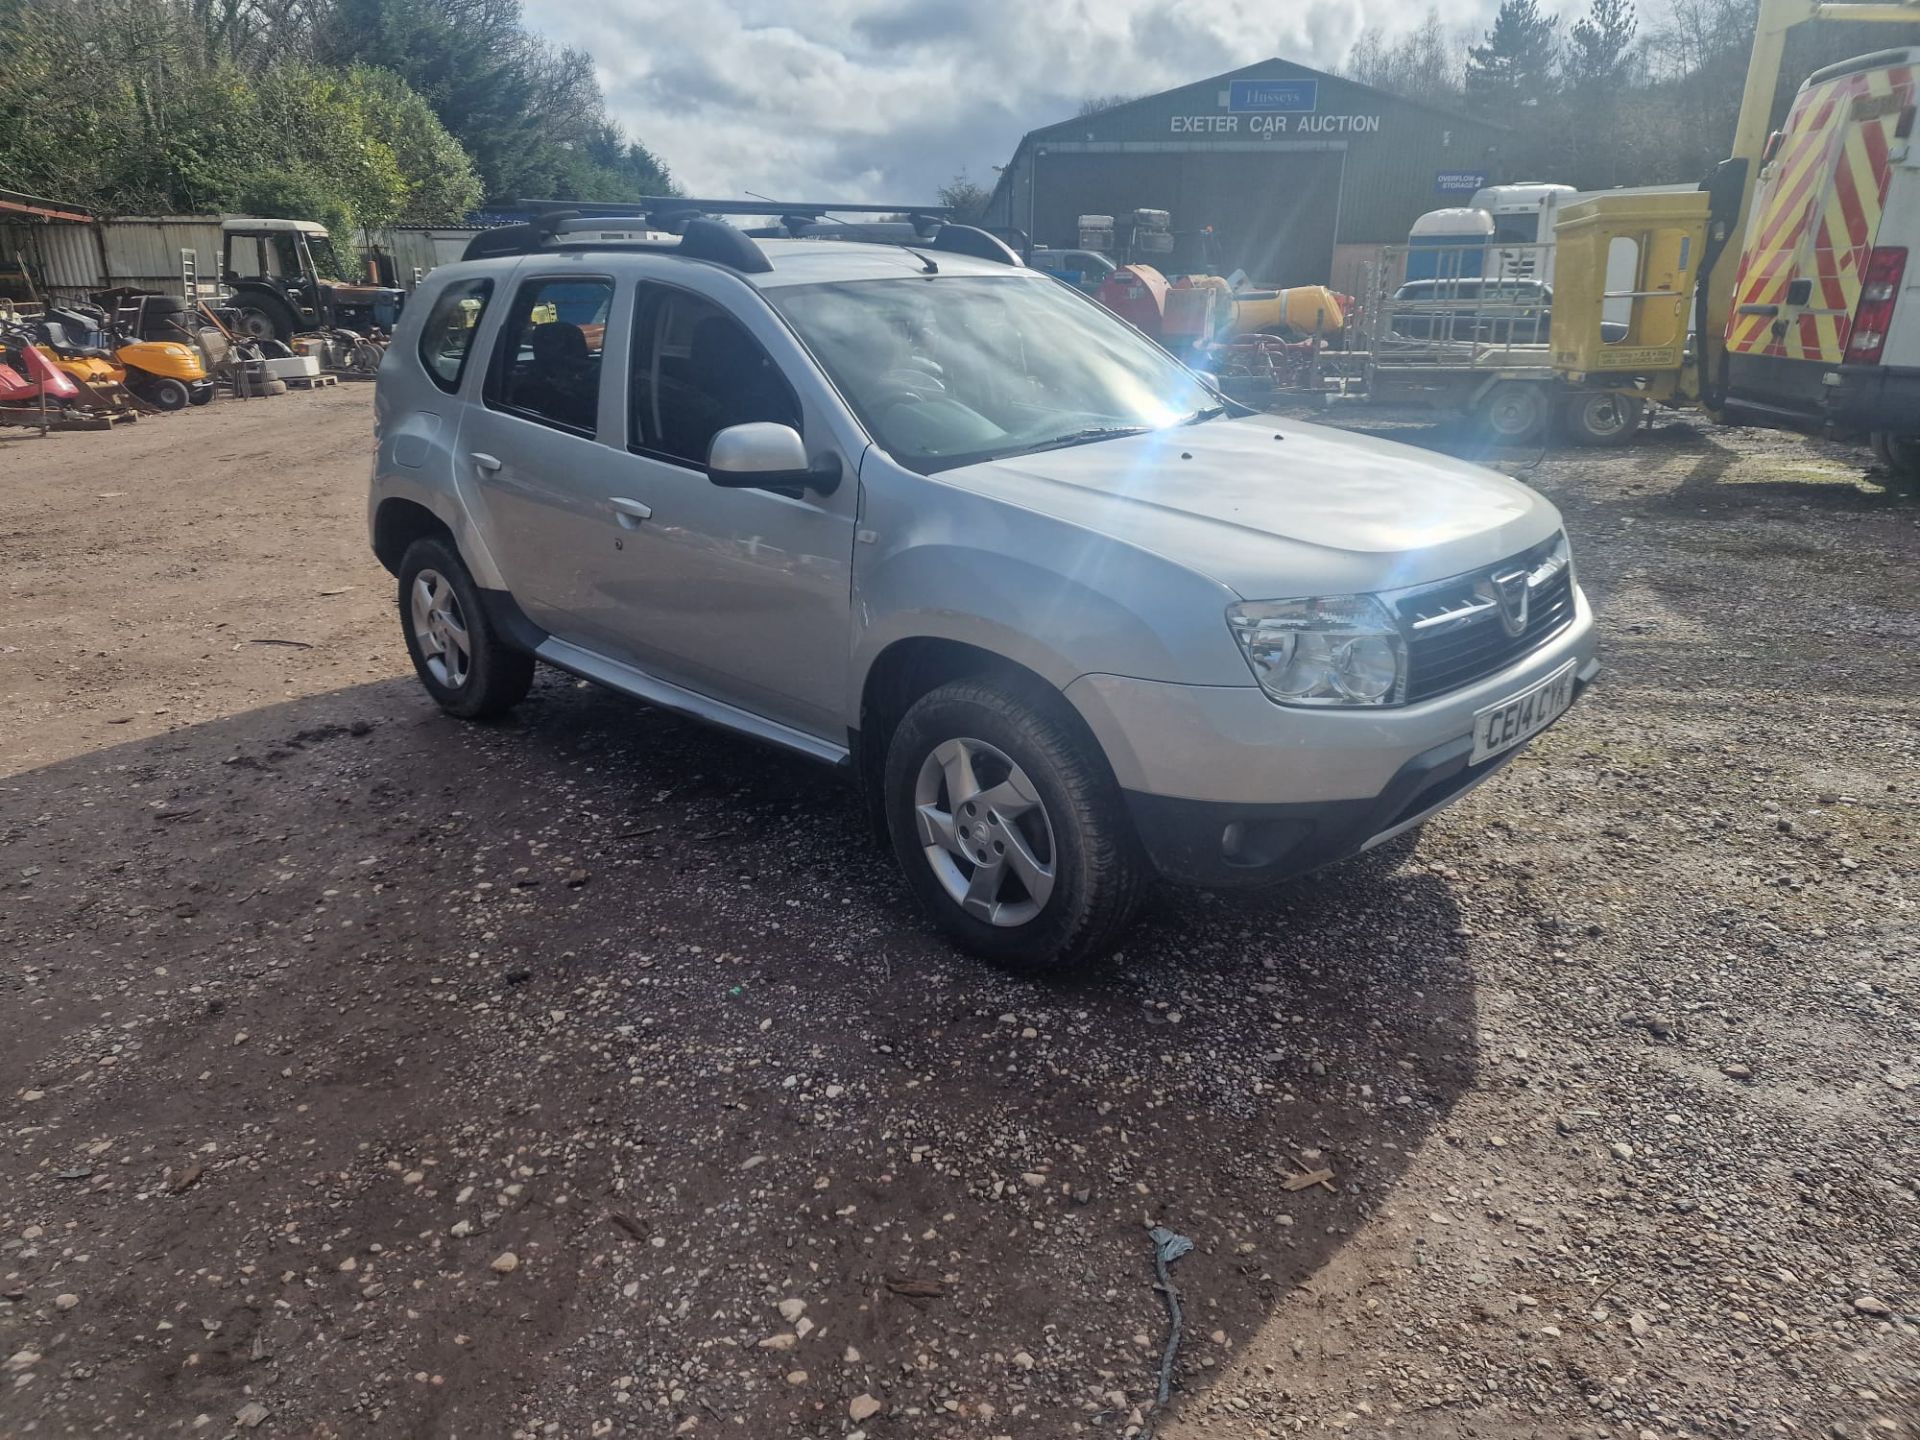 14/14 DACIA DUSTER LAUREATE DCI 4X2 - 1461cc 5dr Hatchback (Silver) - Image 6 of 12